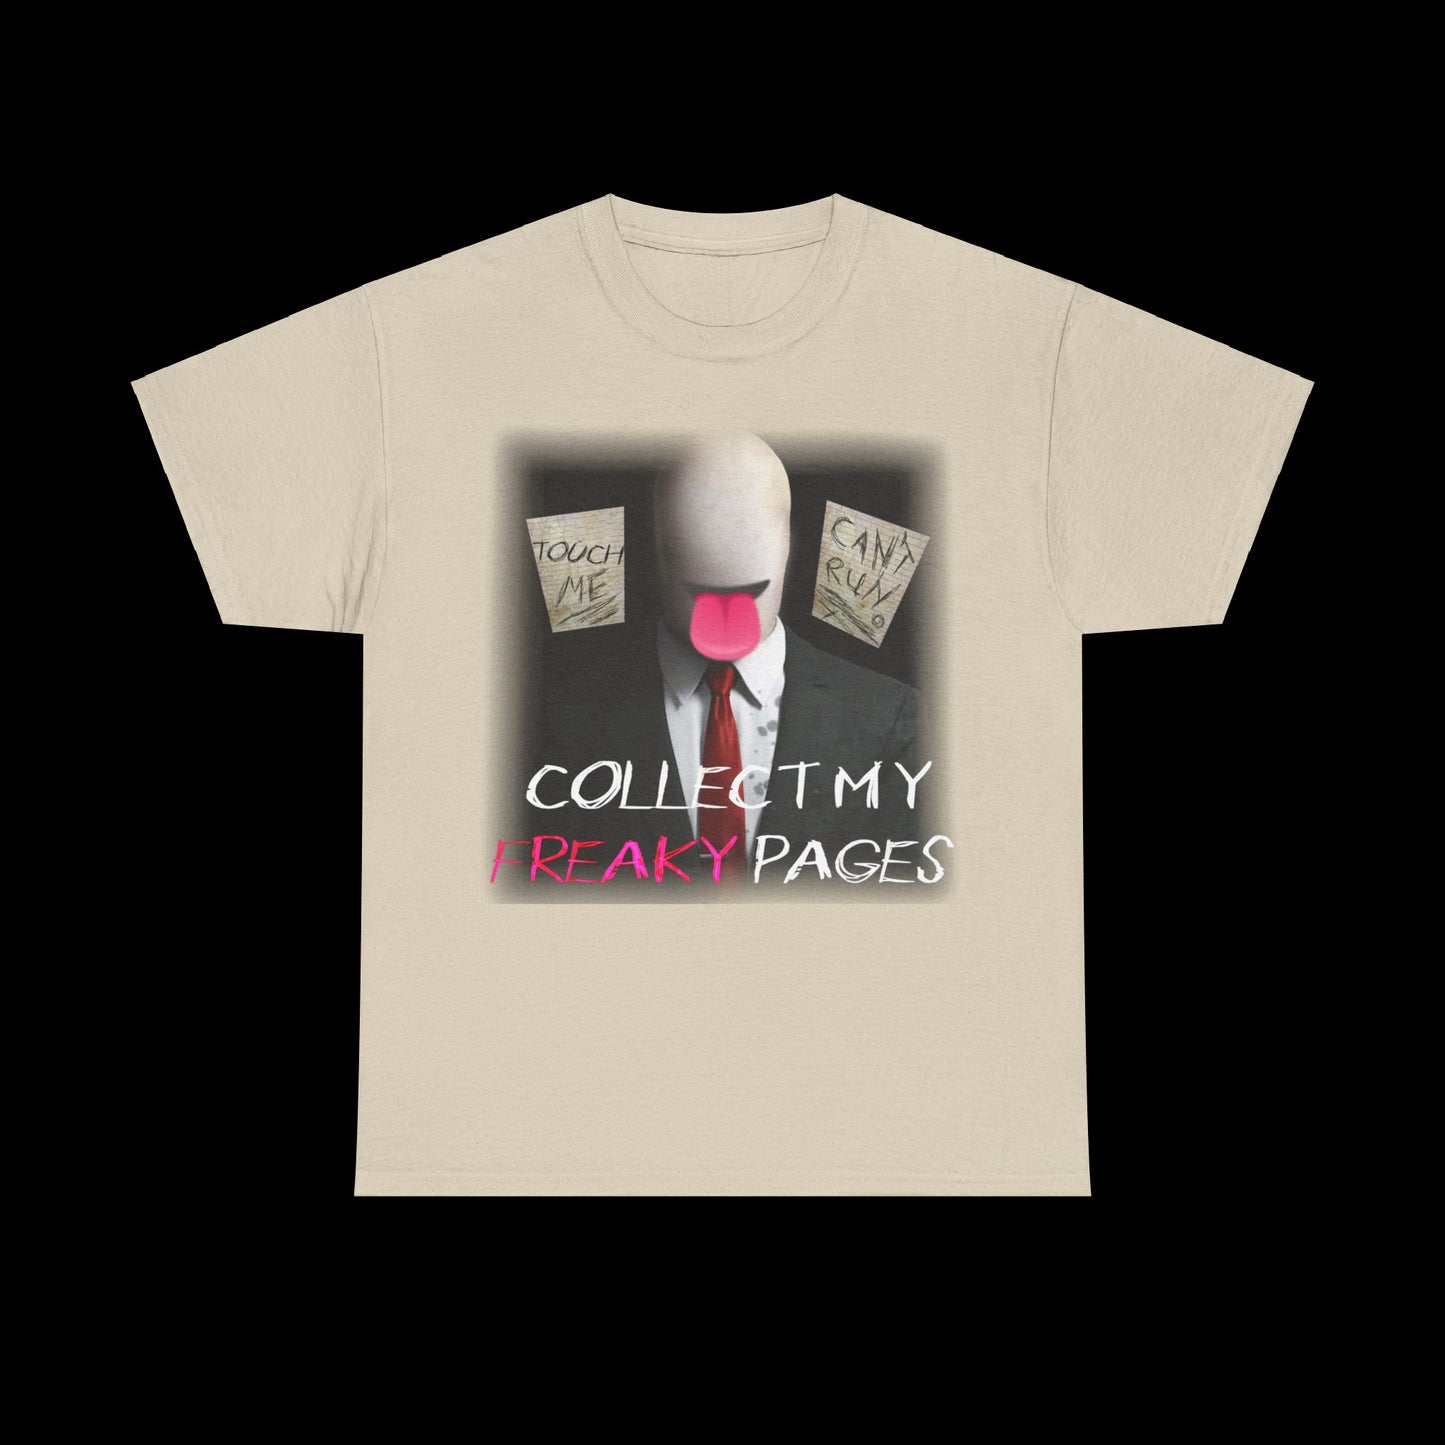 Collect My Freaky Pages T-Shirt